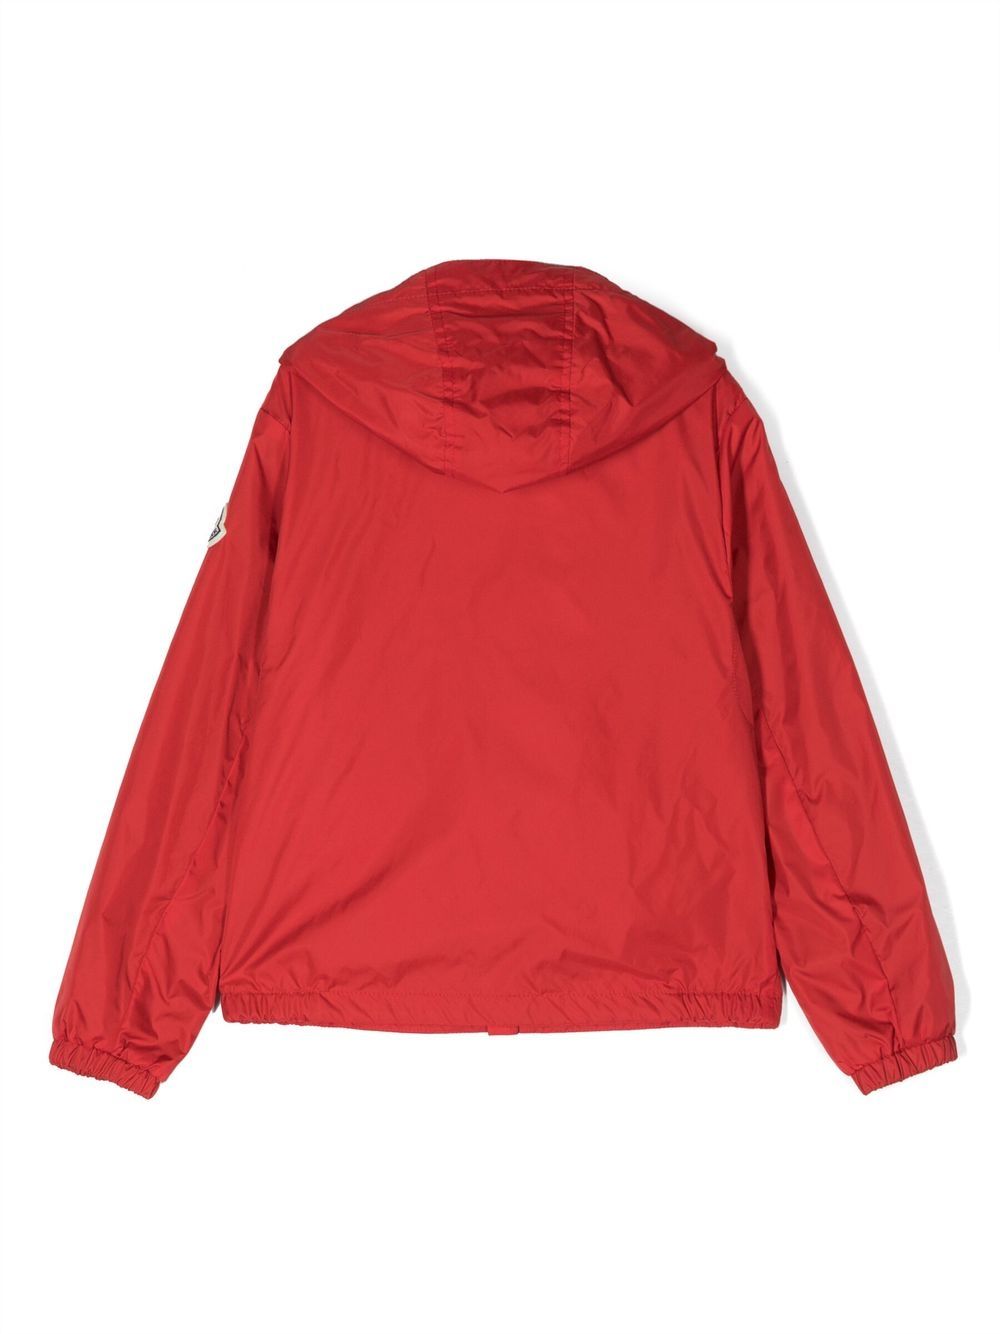 New Urville red jacket for boys with logo